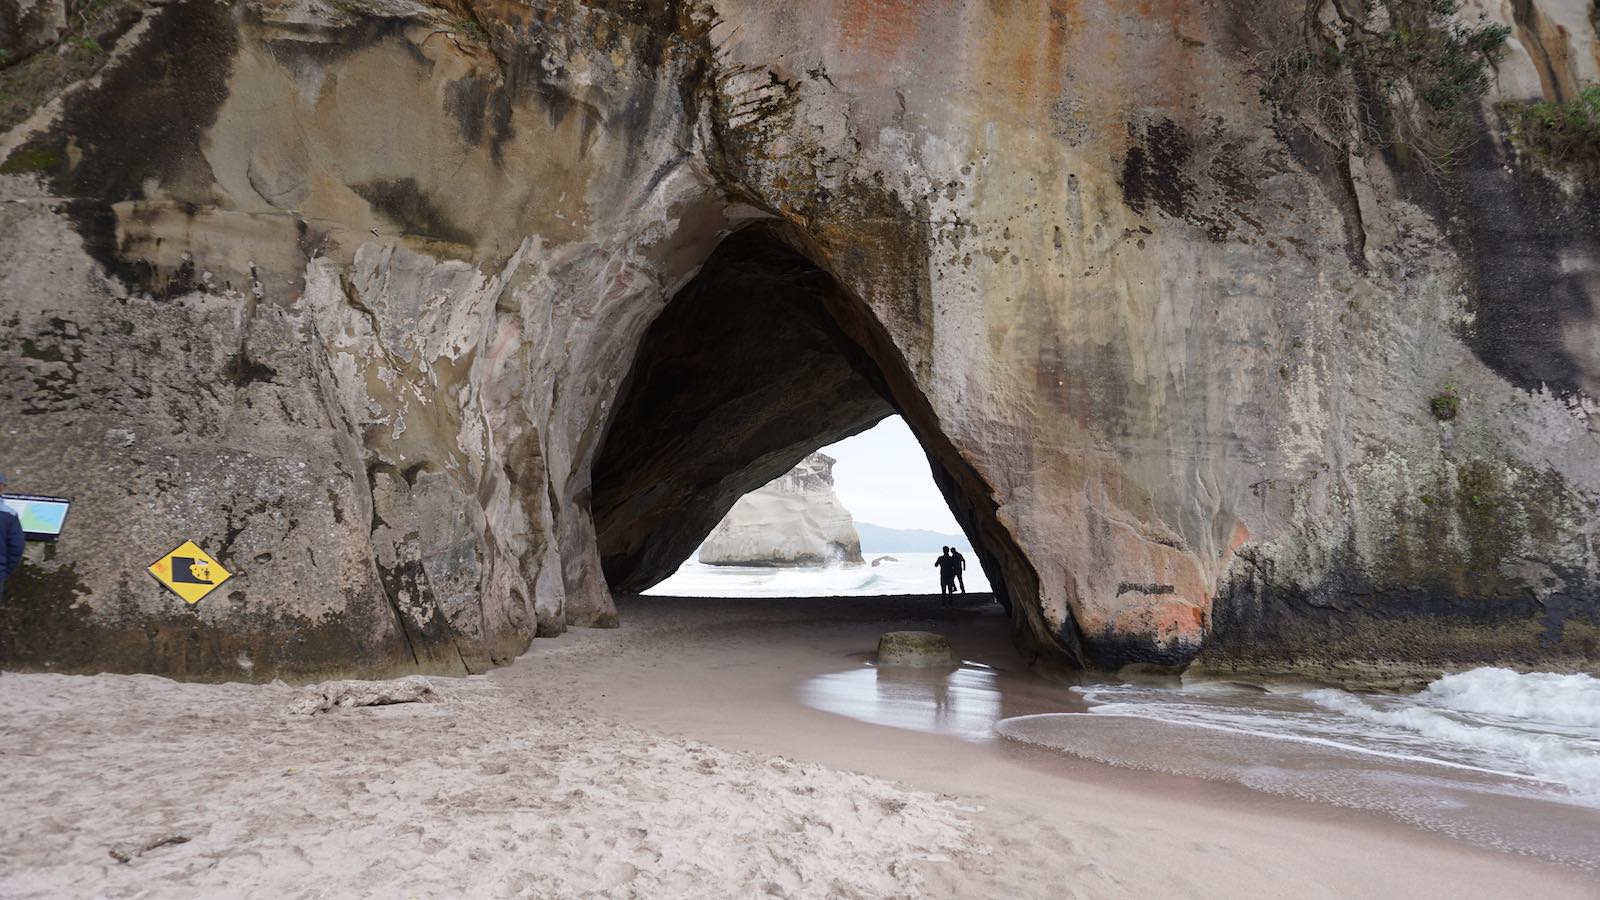 ~30 minute walk down to the beach later, we arrived. This was probably why it's called Cathedral Cove, a good spot for an artsy photo I suppose, but not much more other than that